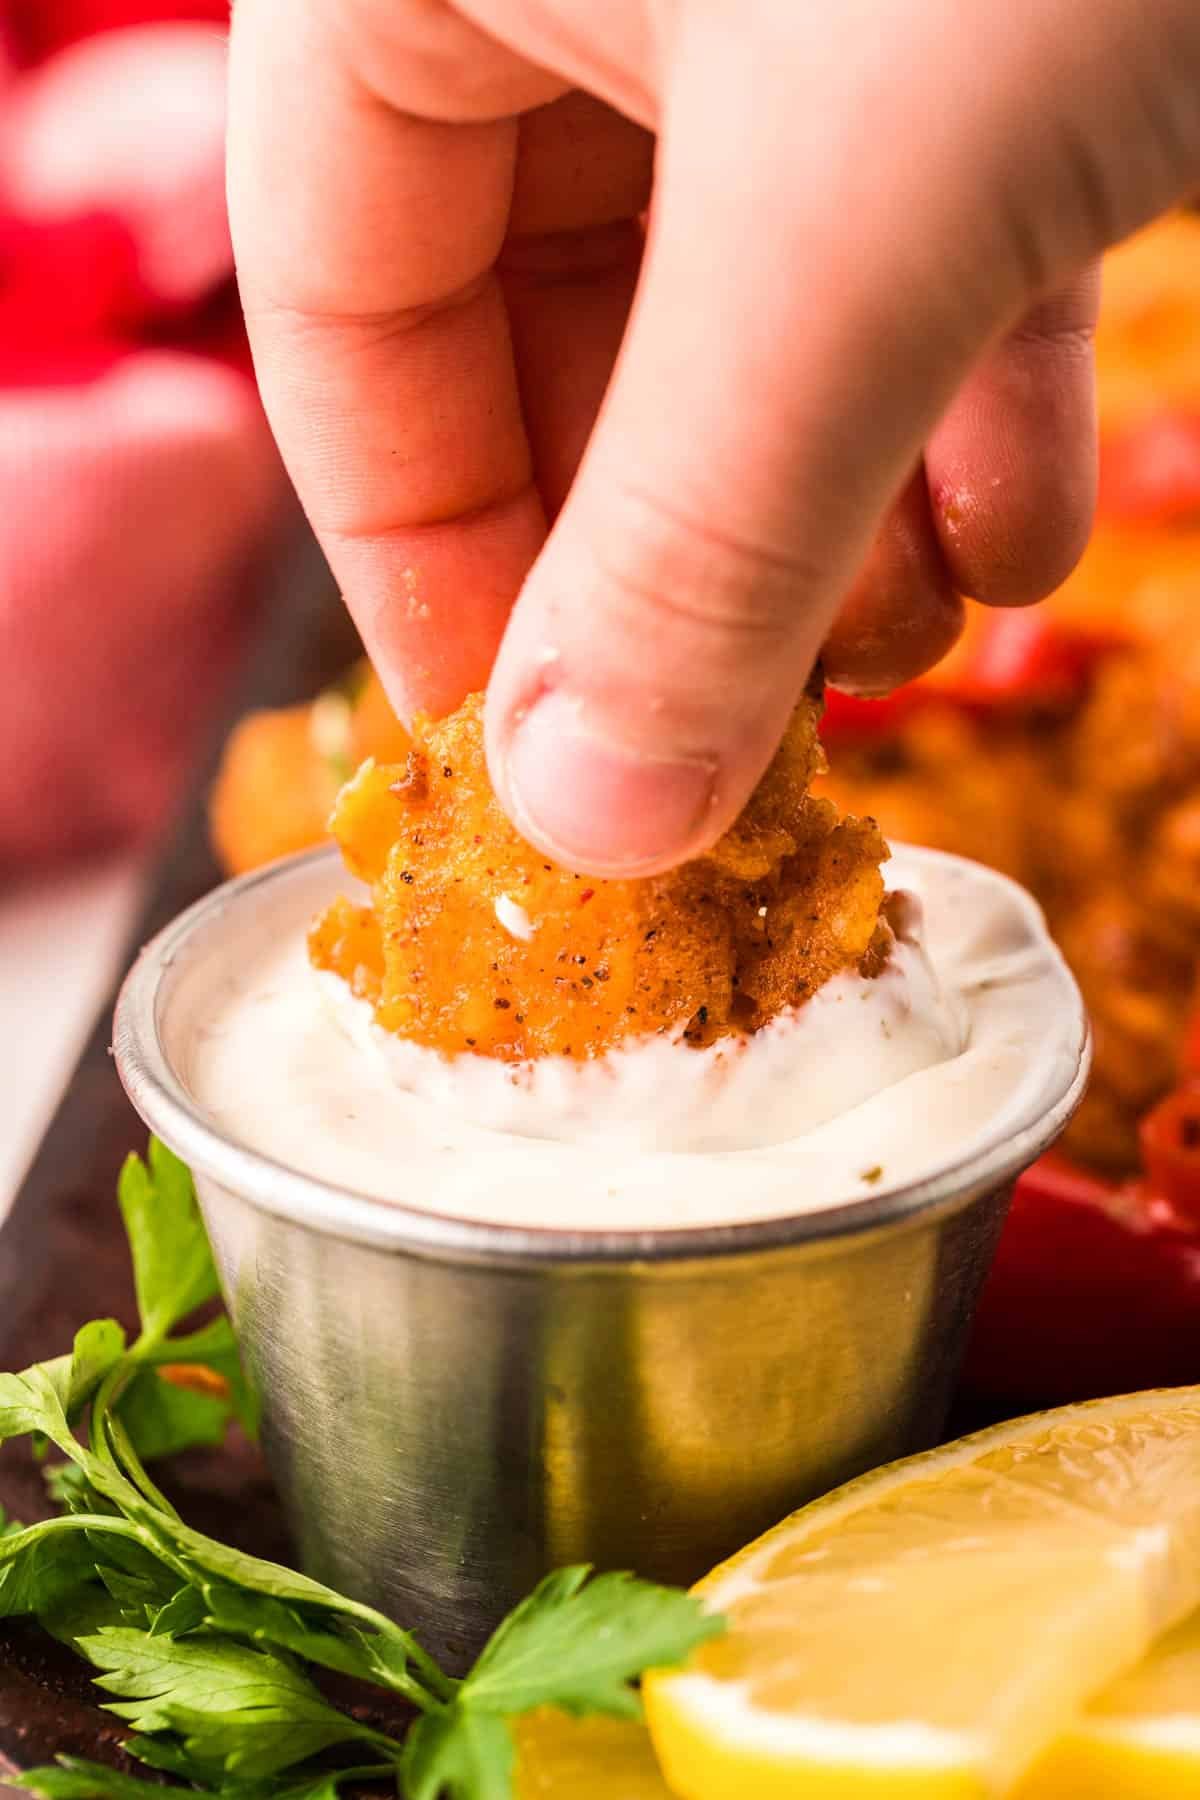 A woman's hand dipping wild west shrimp into ranch dressing.